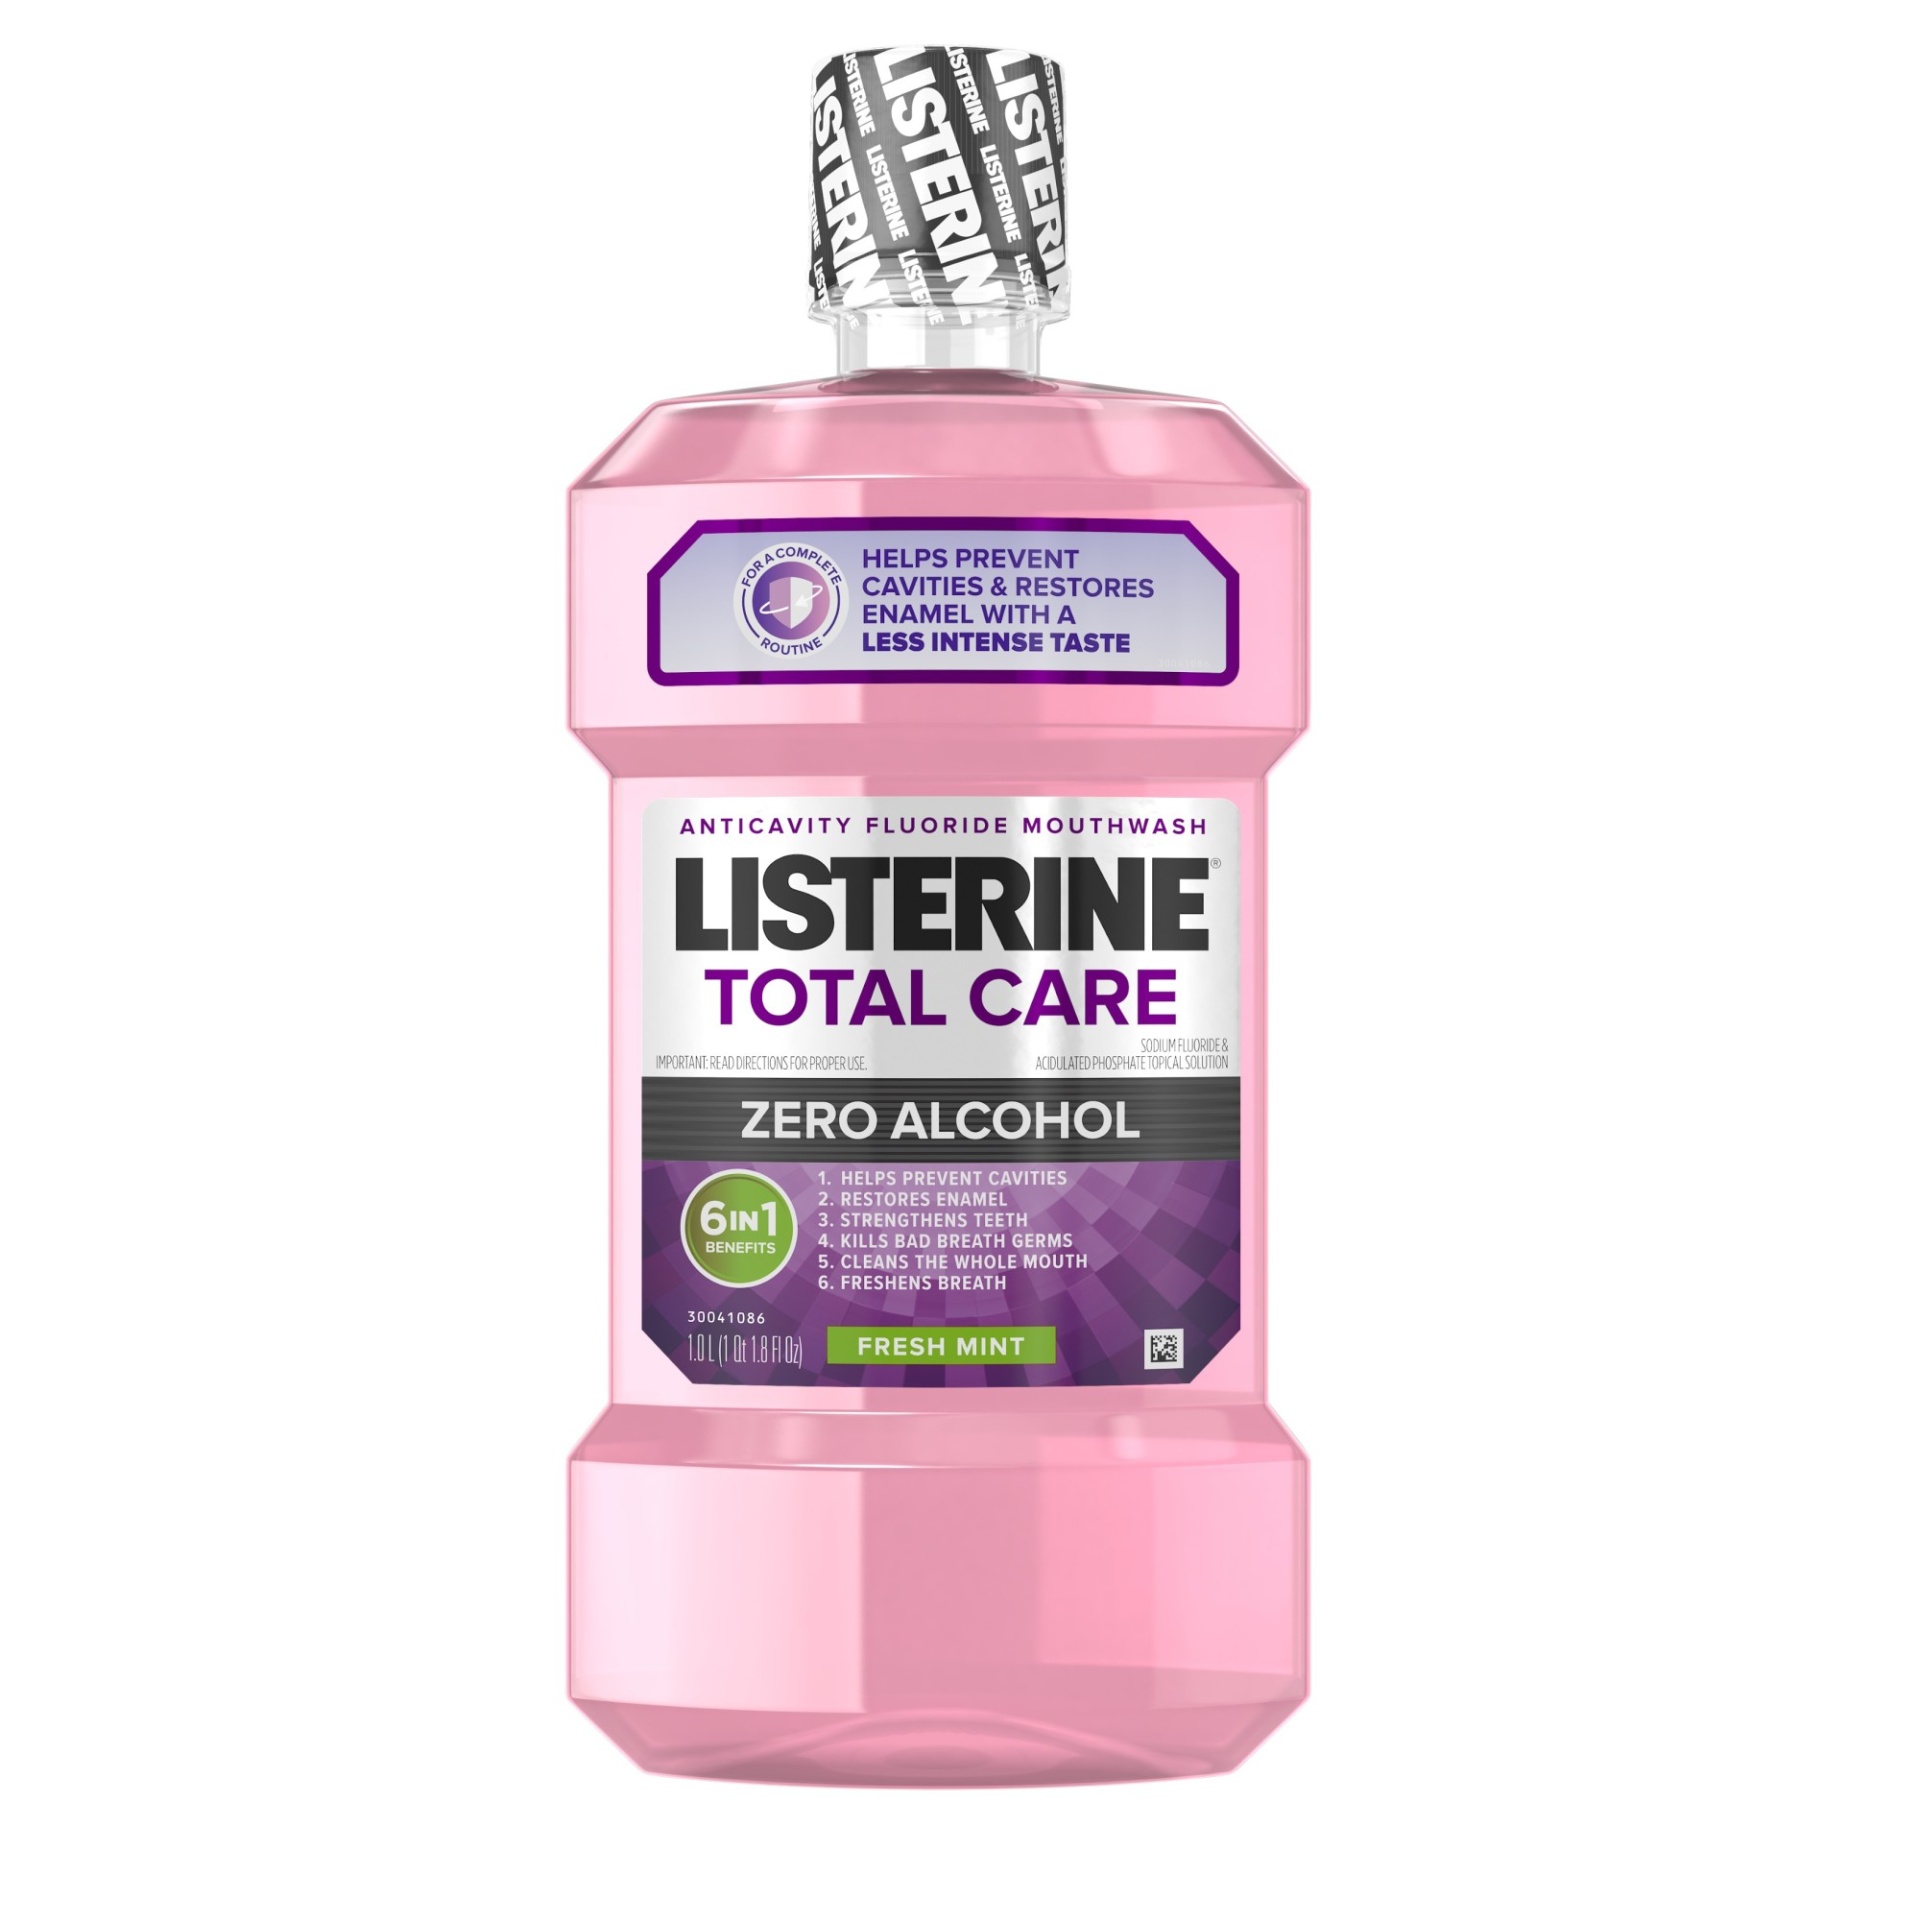 slide 1 of 6, Listerine Total Care Alcohol-Free Anticavity Fluoride Mouthwash, 6 Benefit Oral Rinse to Help Kill 99% of Germs that Cause Bad Breath, Strengthen Enamel, Fresh Mint Flavor, 1 liter